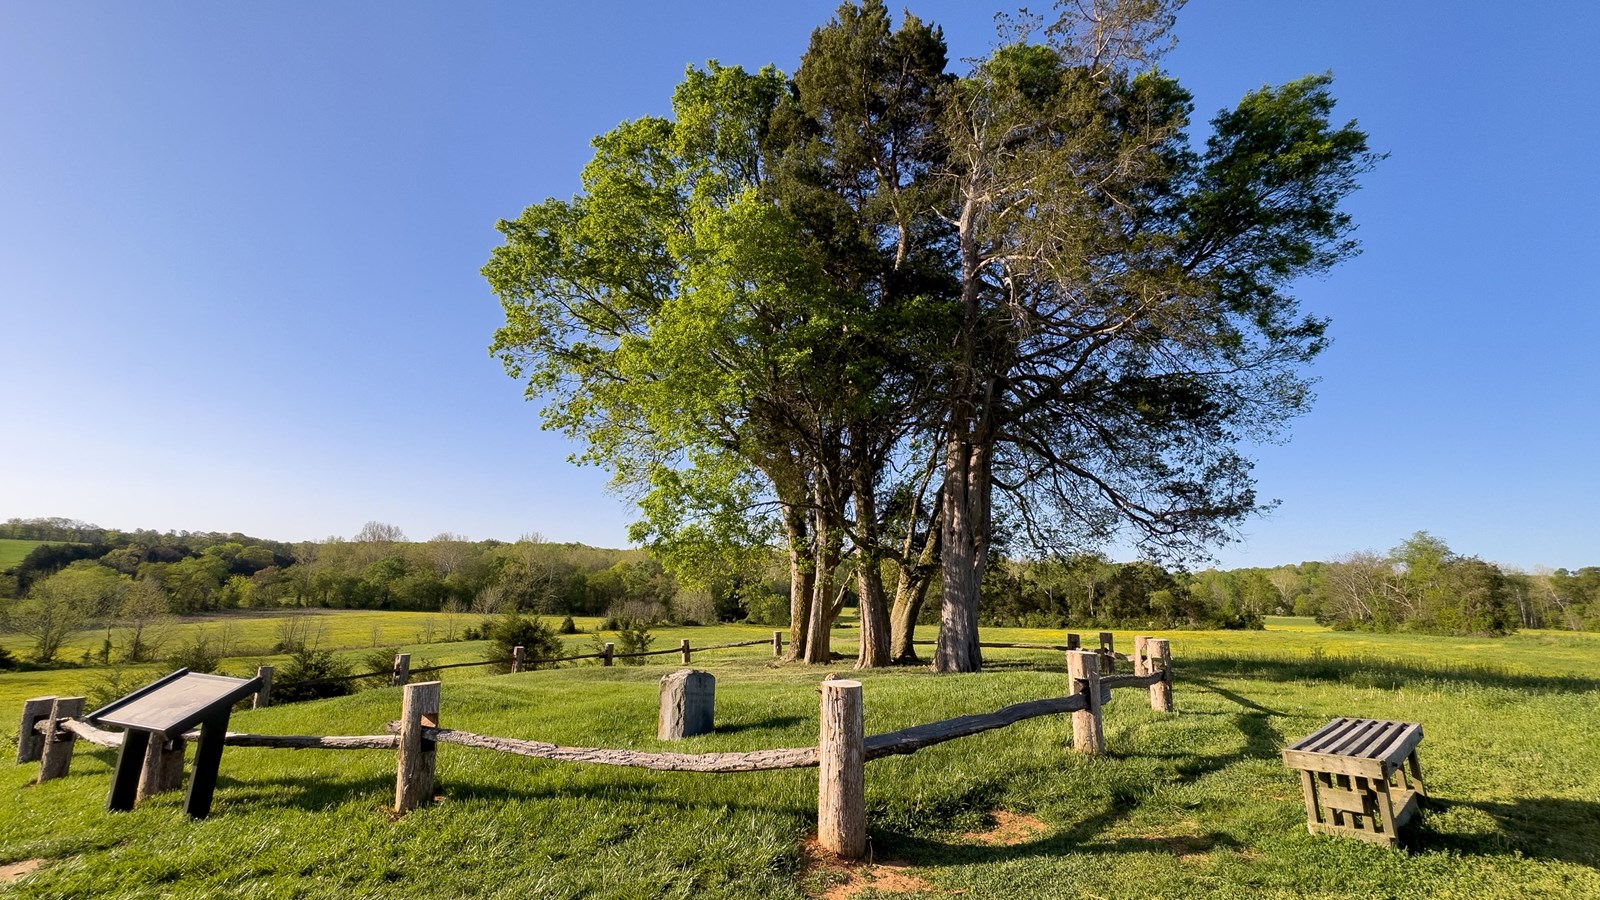 A grassy area with a stone marker and tree enclosed by a wood fence.